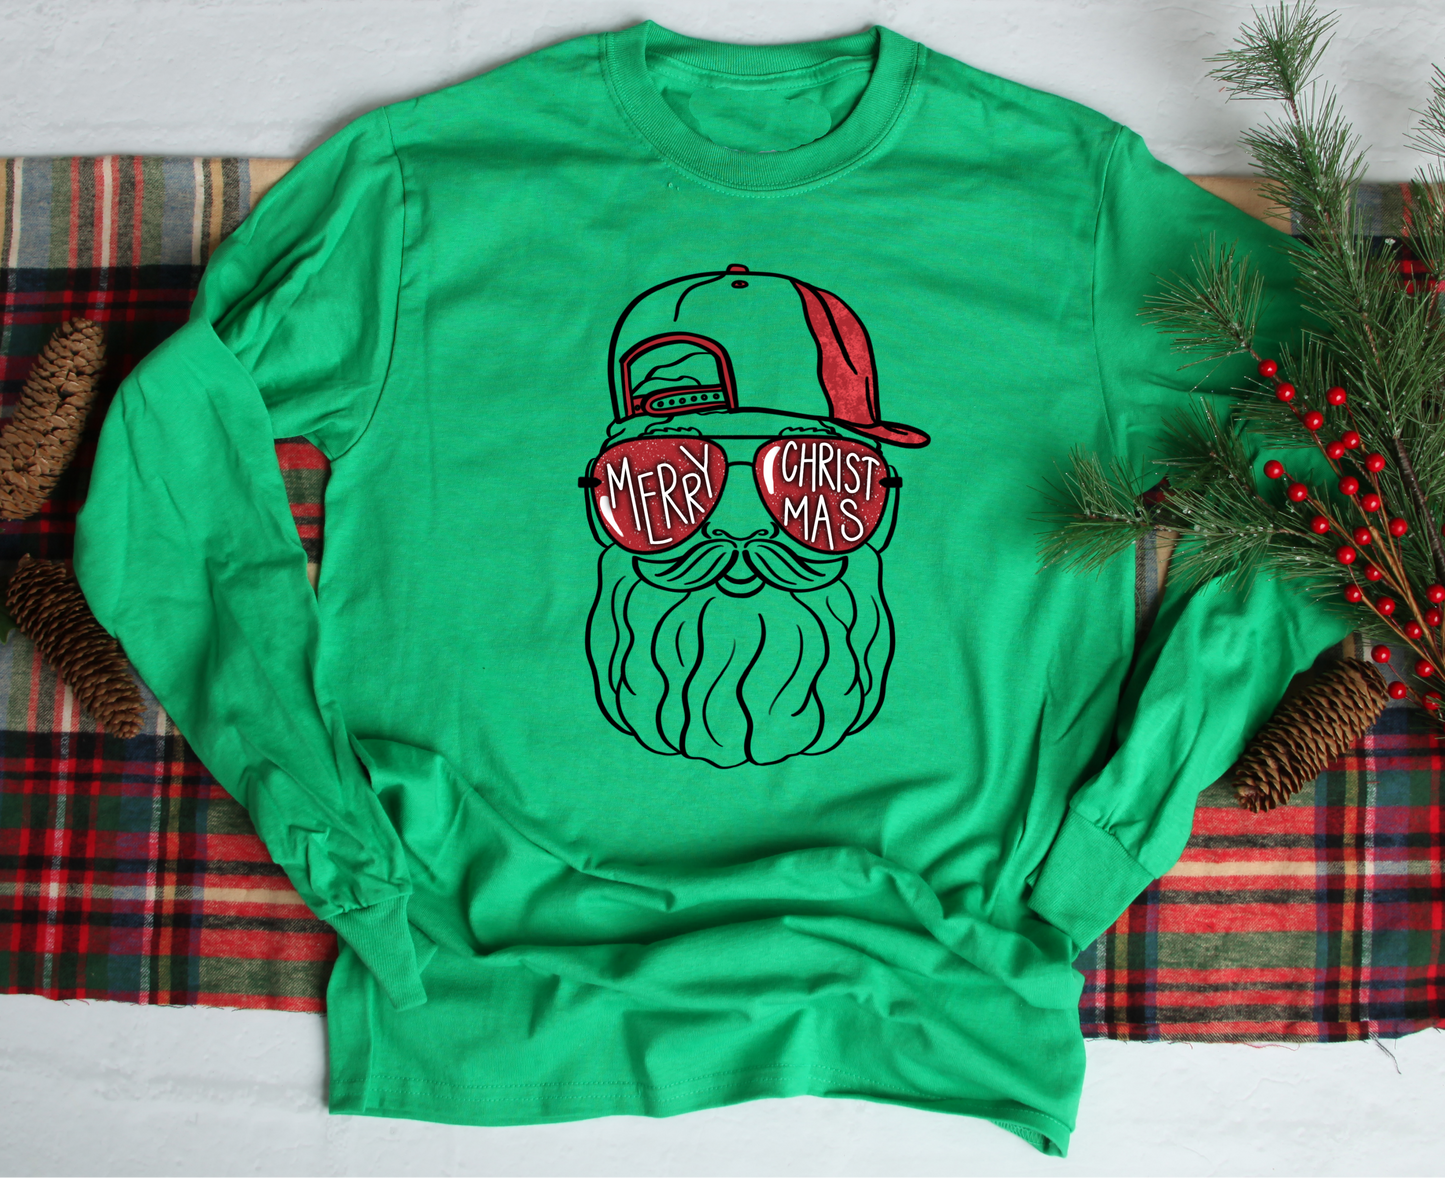 Santa Clause Stitched Patched Long Sleeve Shirt 2XL Green Vintage